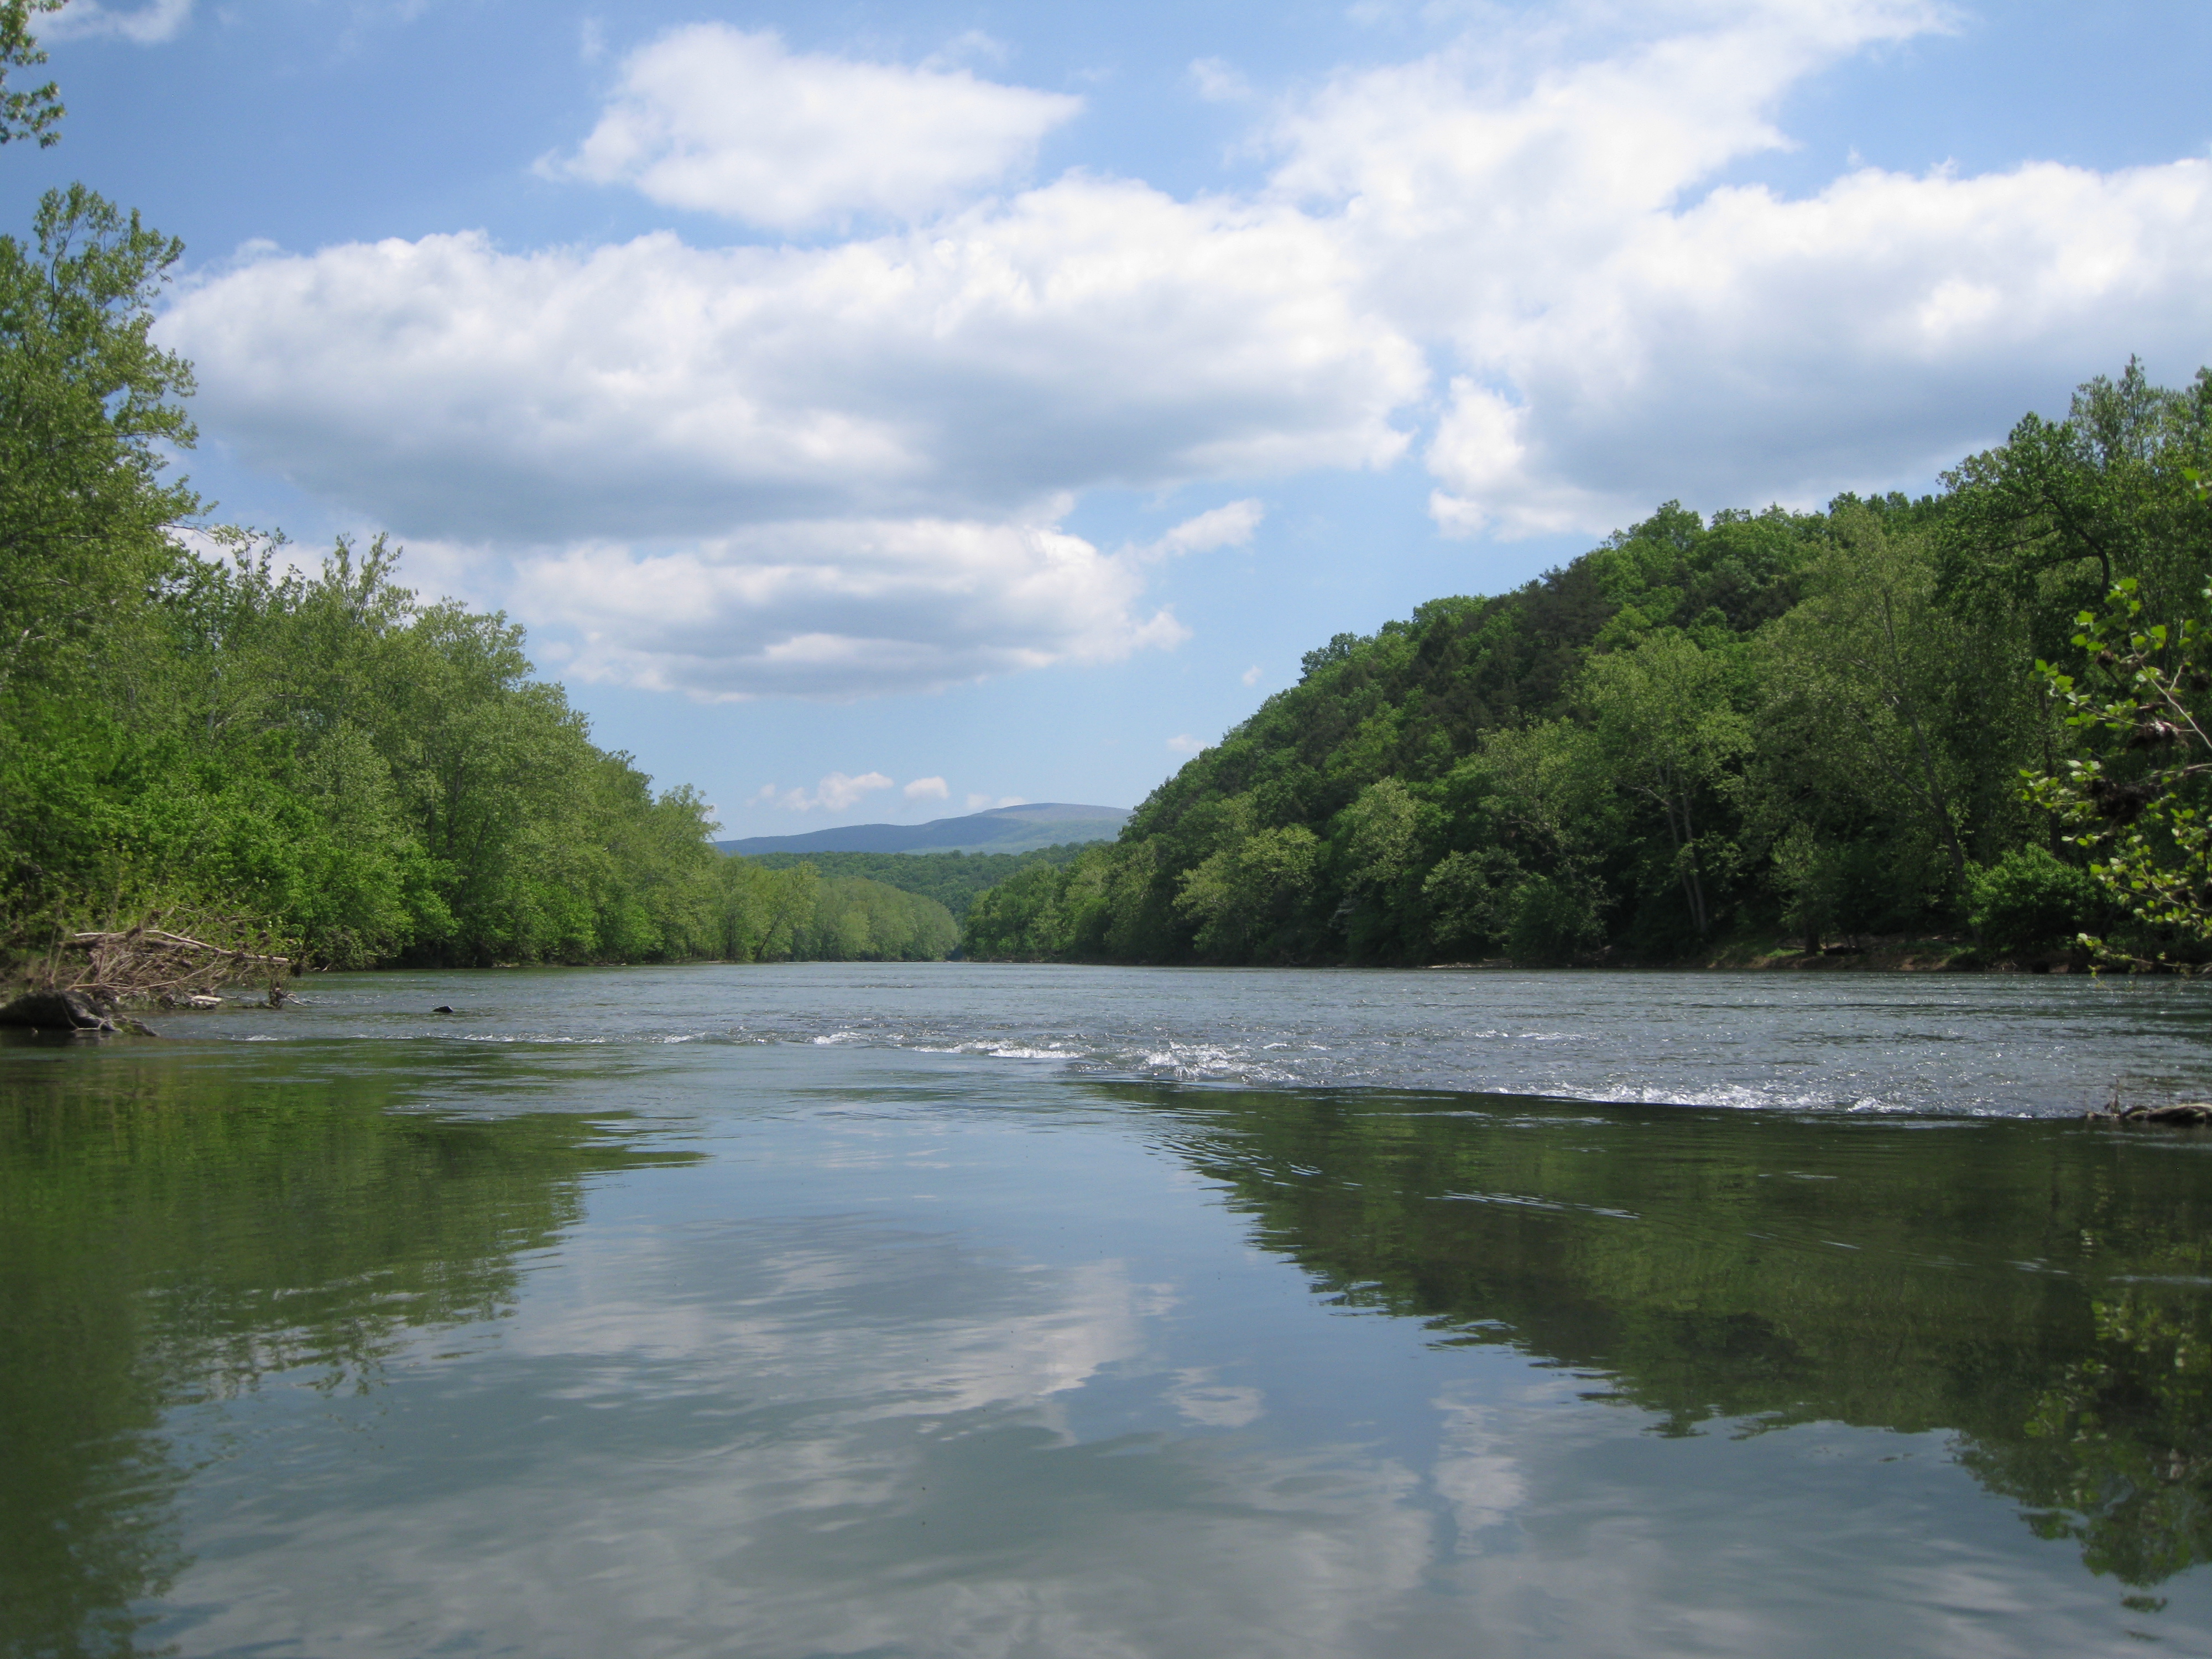 For the river in New Zealand, see Shenandoah River, New Zealand .